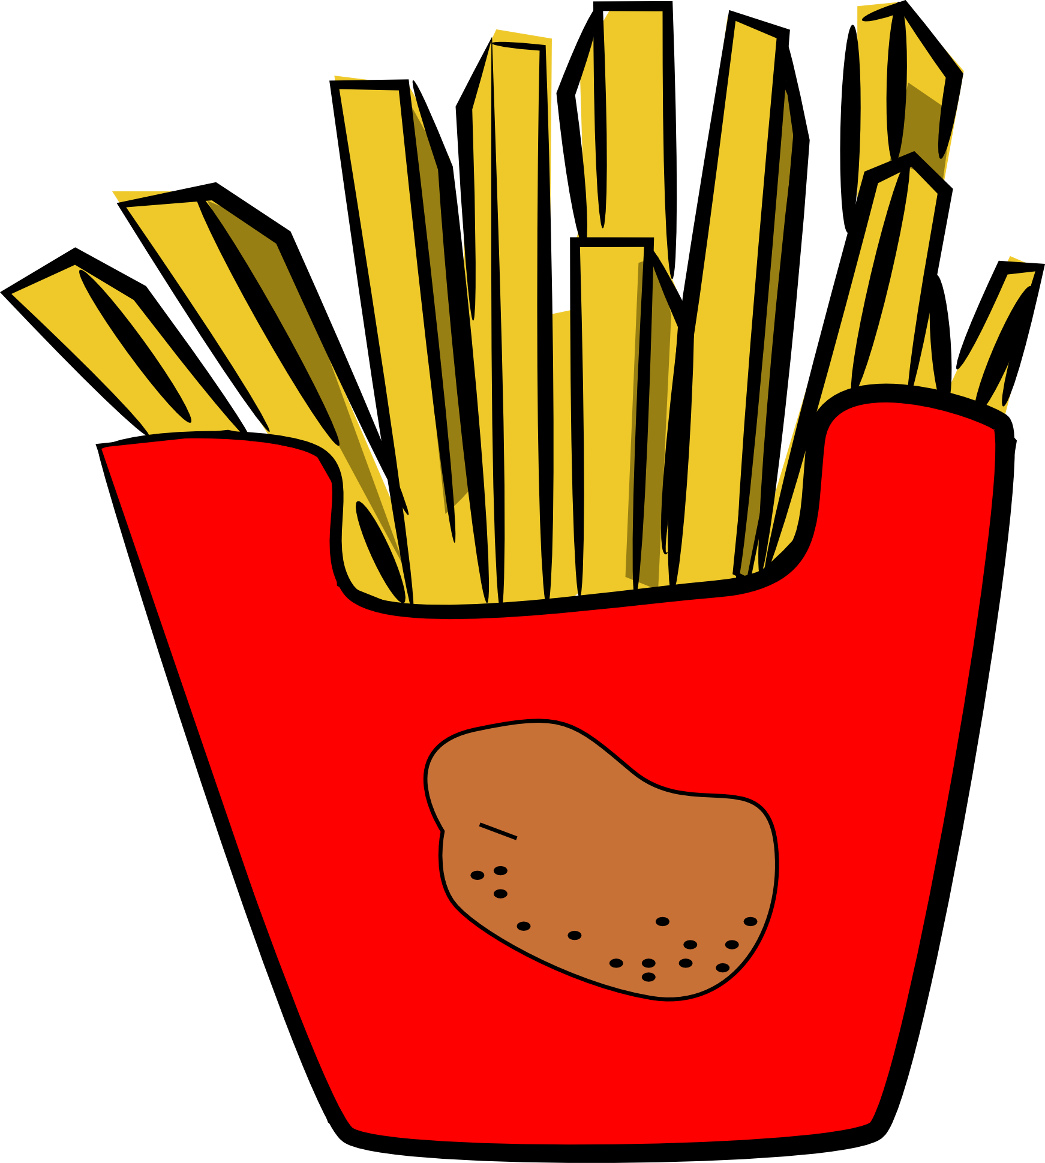 The Totally Free Clip Art Blog: Food - French fries